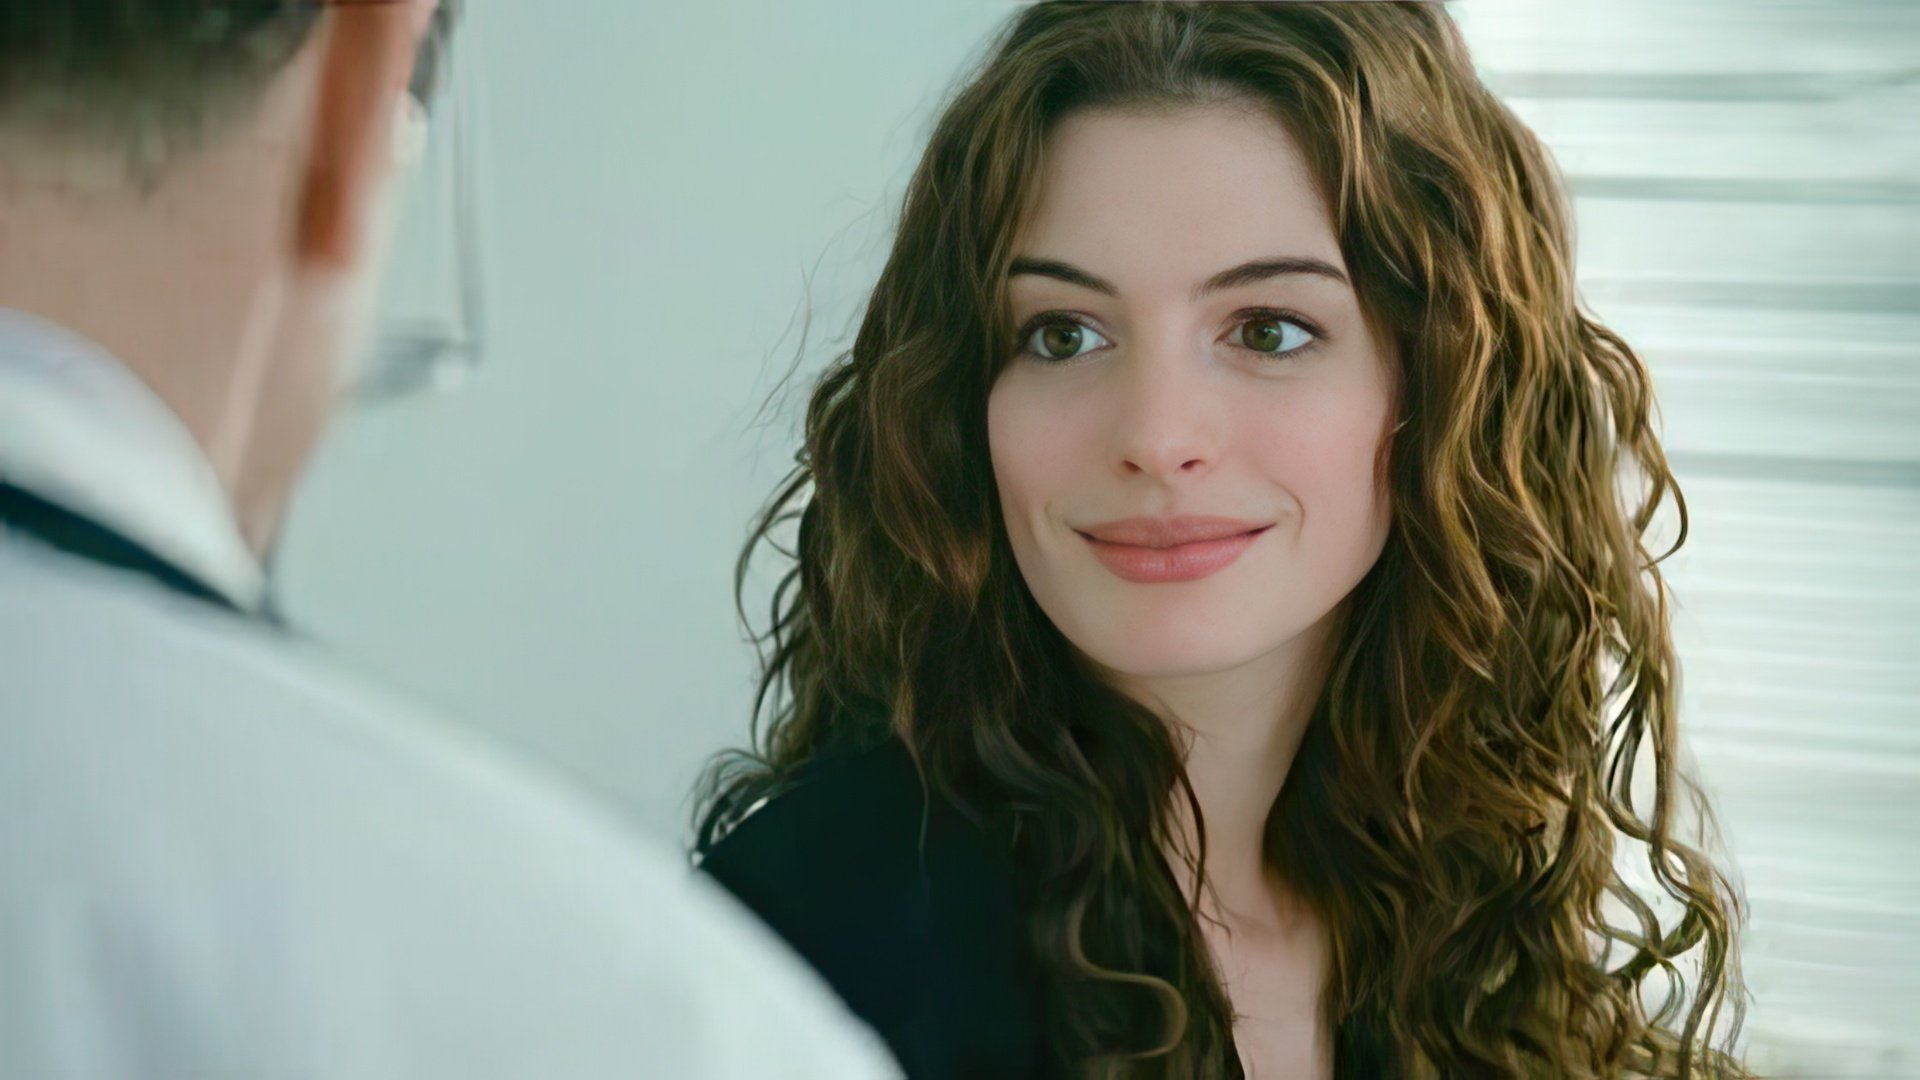 A still from Love and Other Drugs